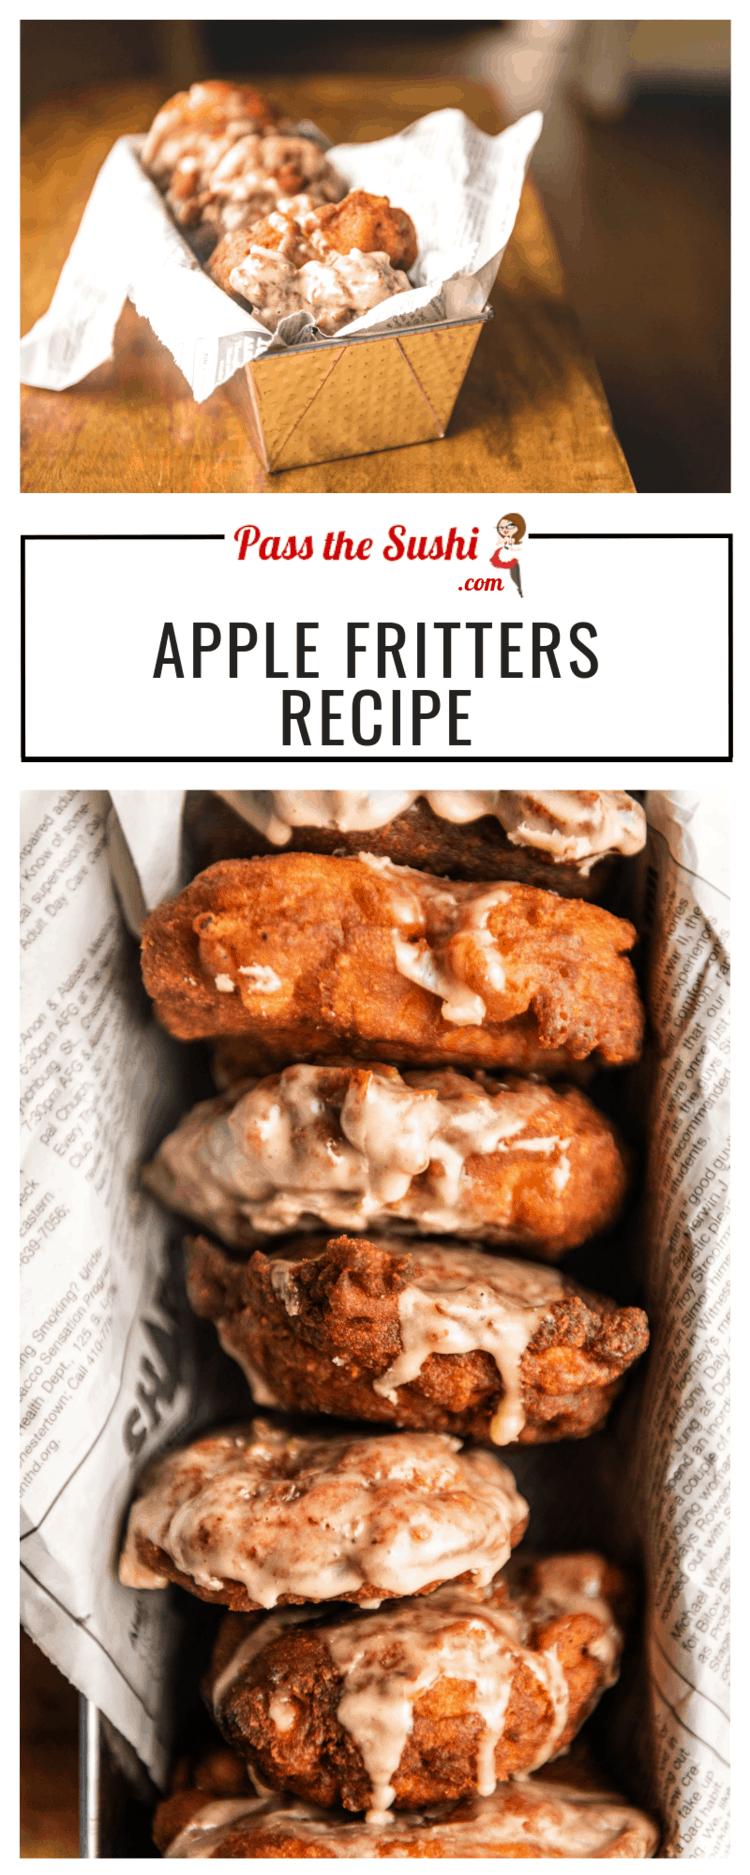 The best mornings start with fresh warm apple fritters. They take your doughnut game up a level and this recipe makes perfect fritters every time!